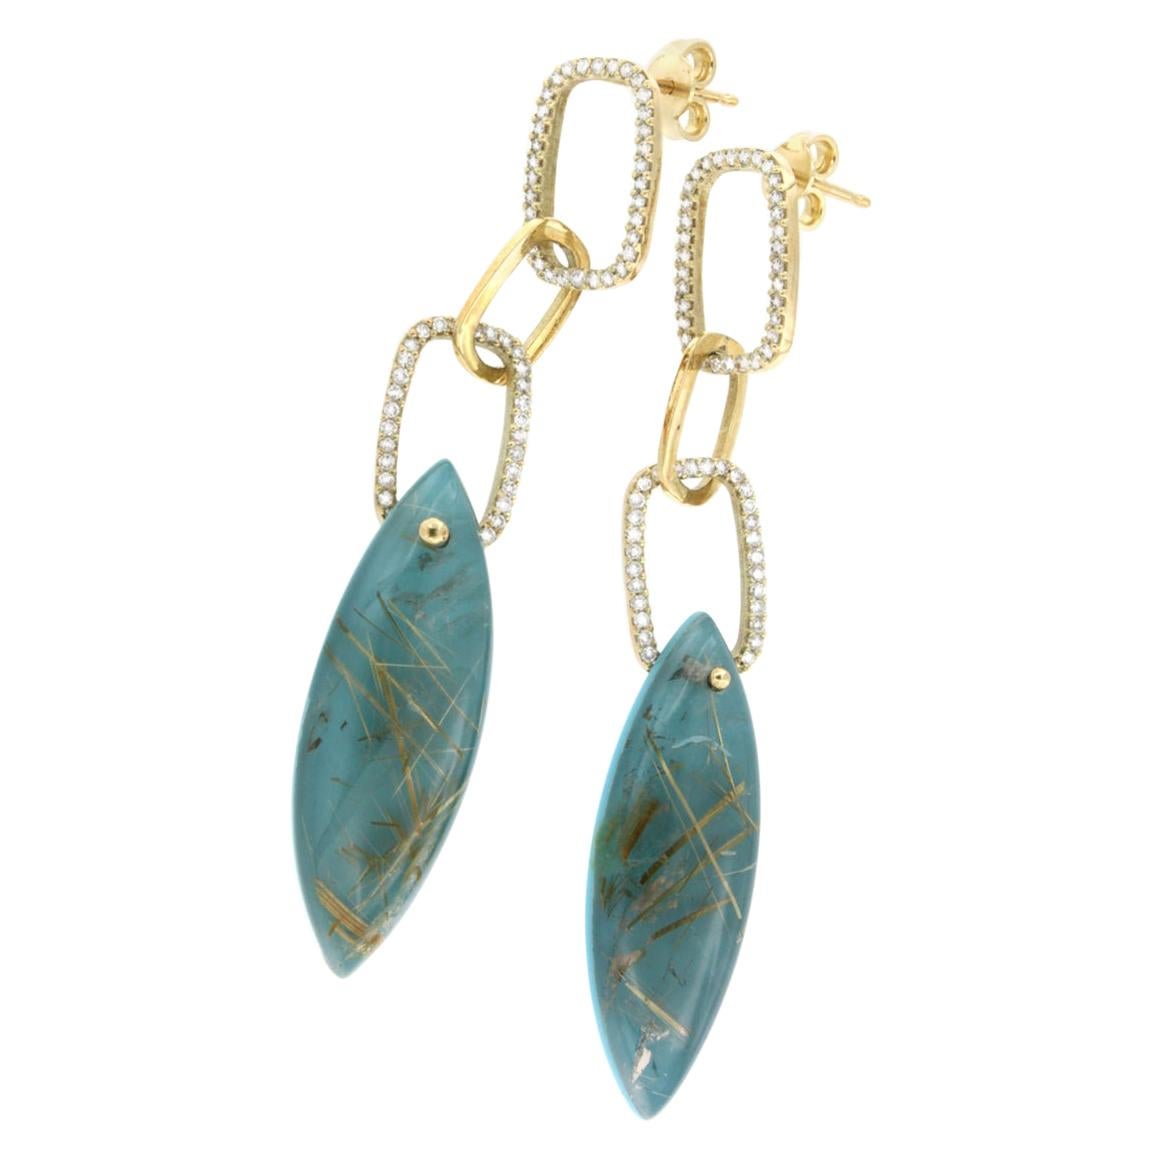 14k Yellow Gold with Rutilate Quartz Turquoise and White Diamonds Earrings